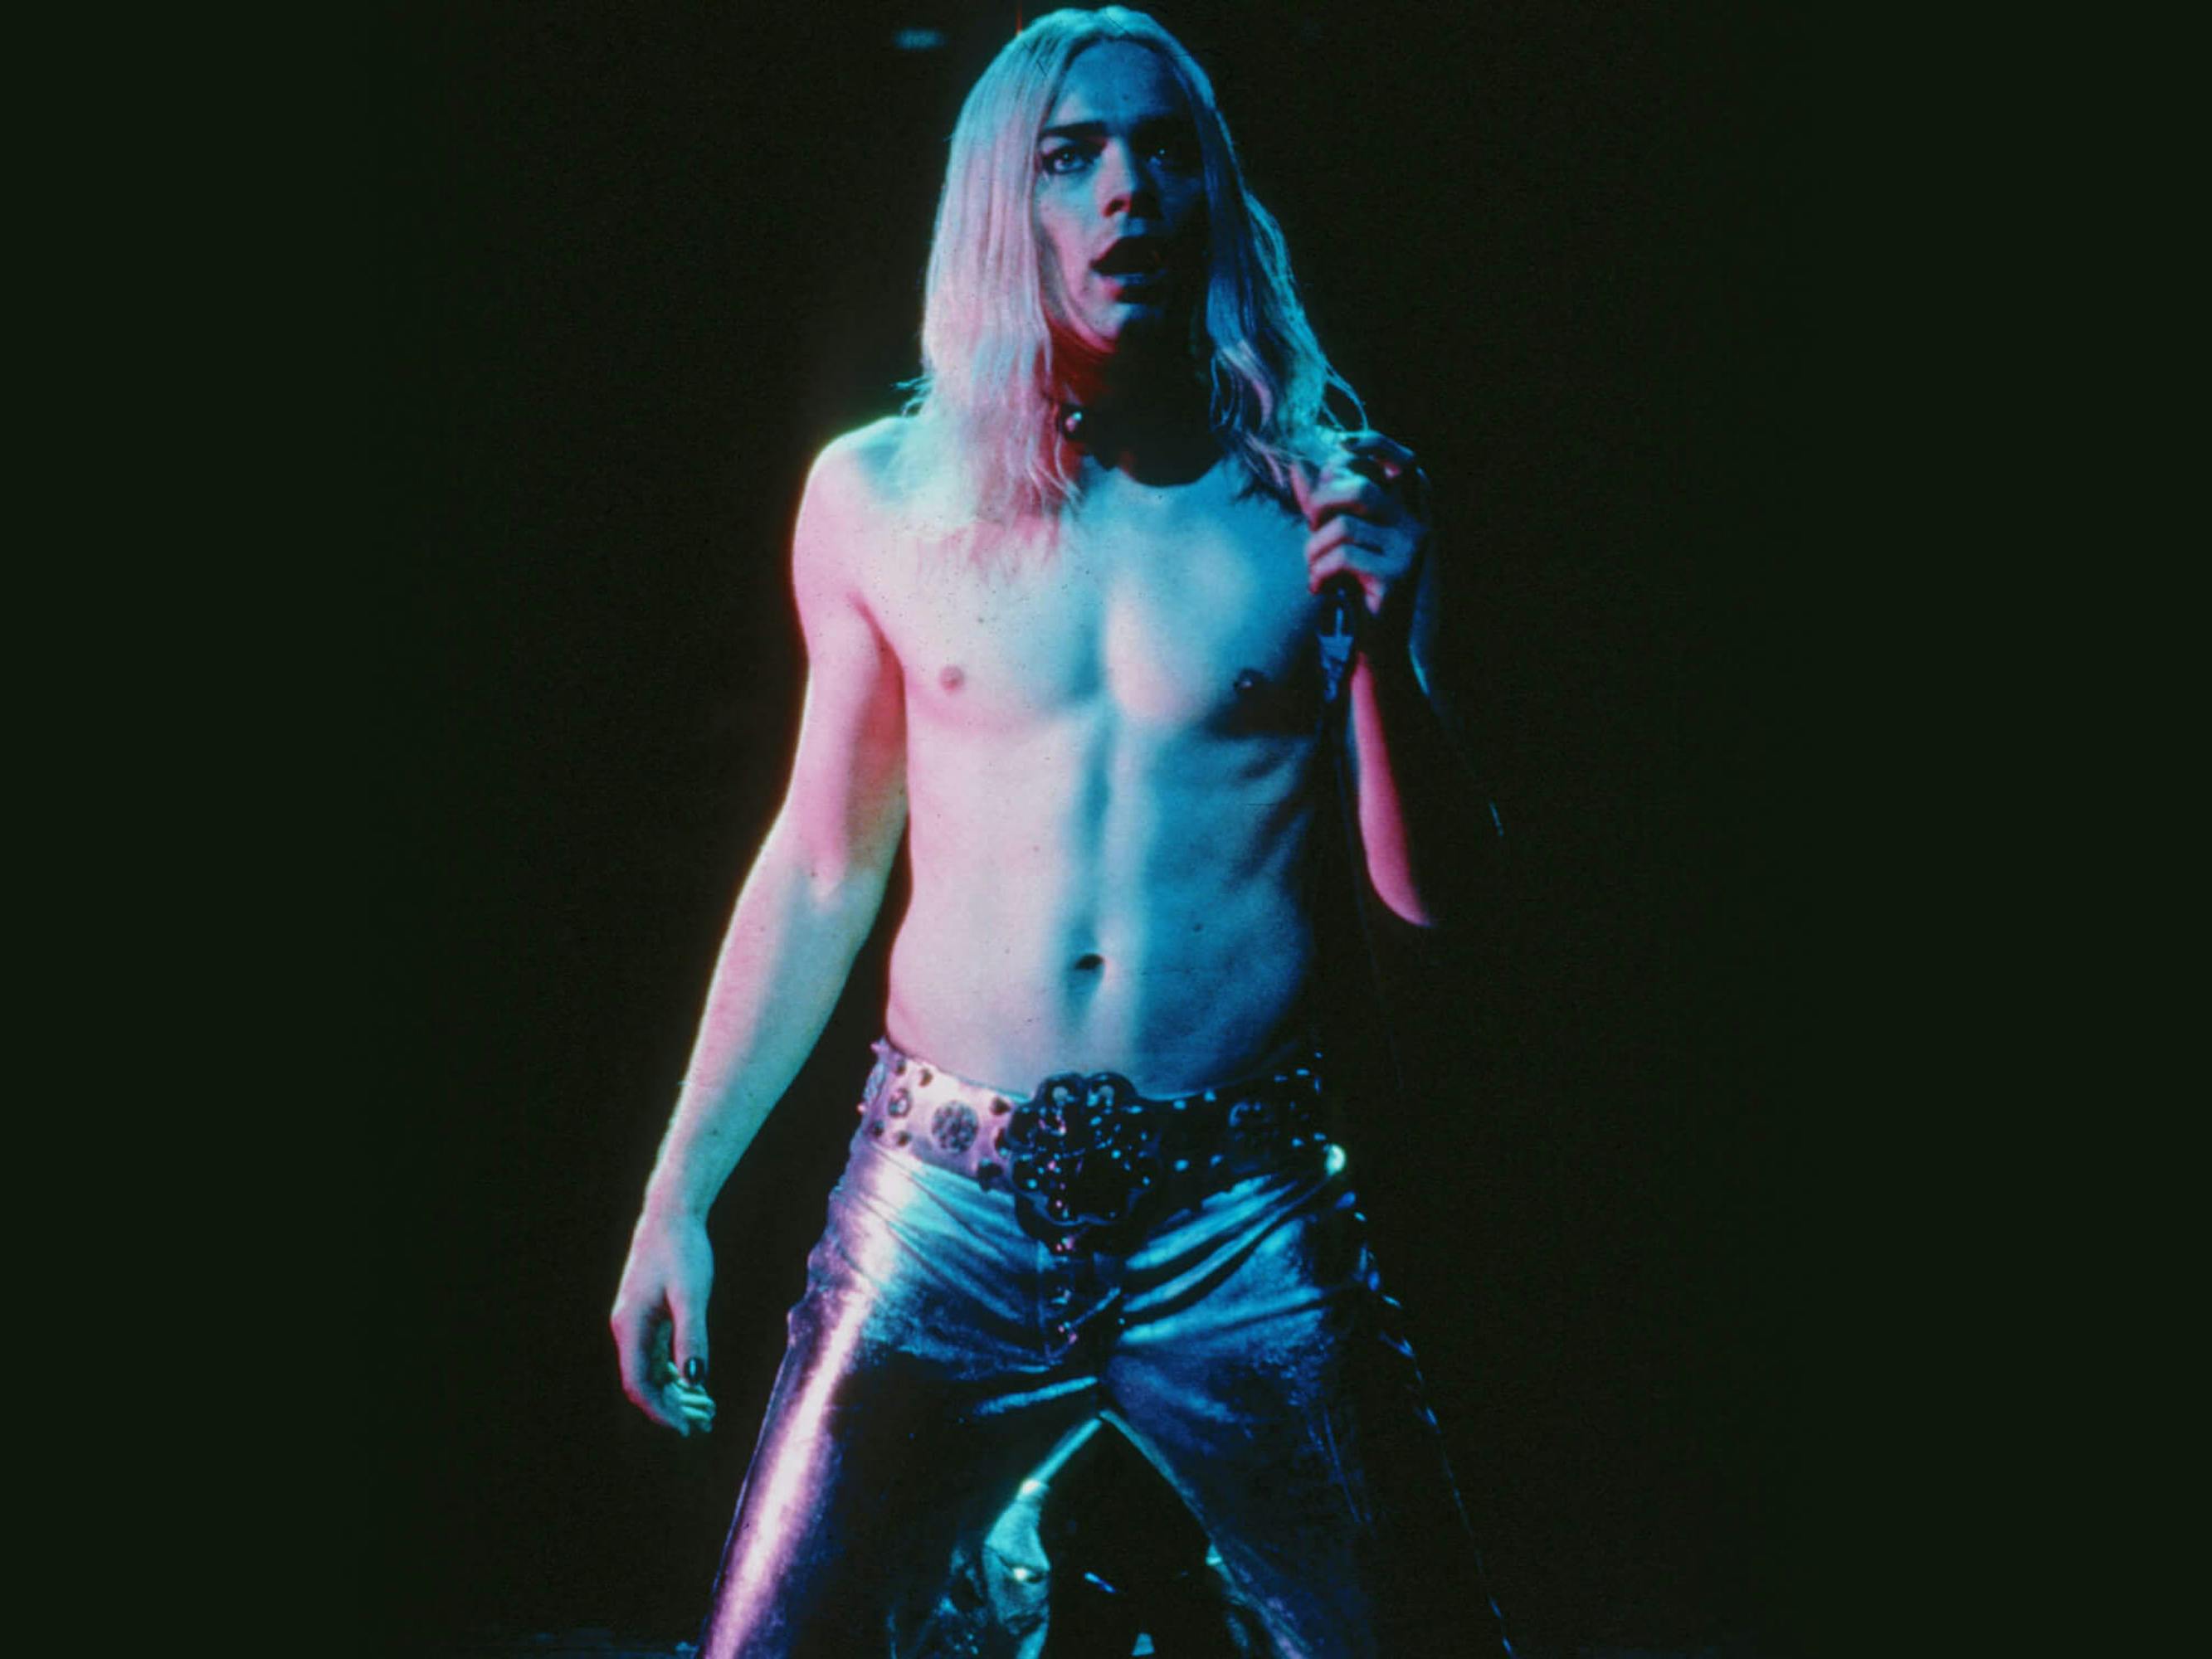 Curt Wild (Ewan McGregor) in Velvet Goldmine. The background is dark, accentuating his pale bare chest, long blond hair, and shiny pants.